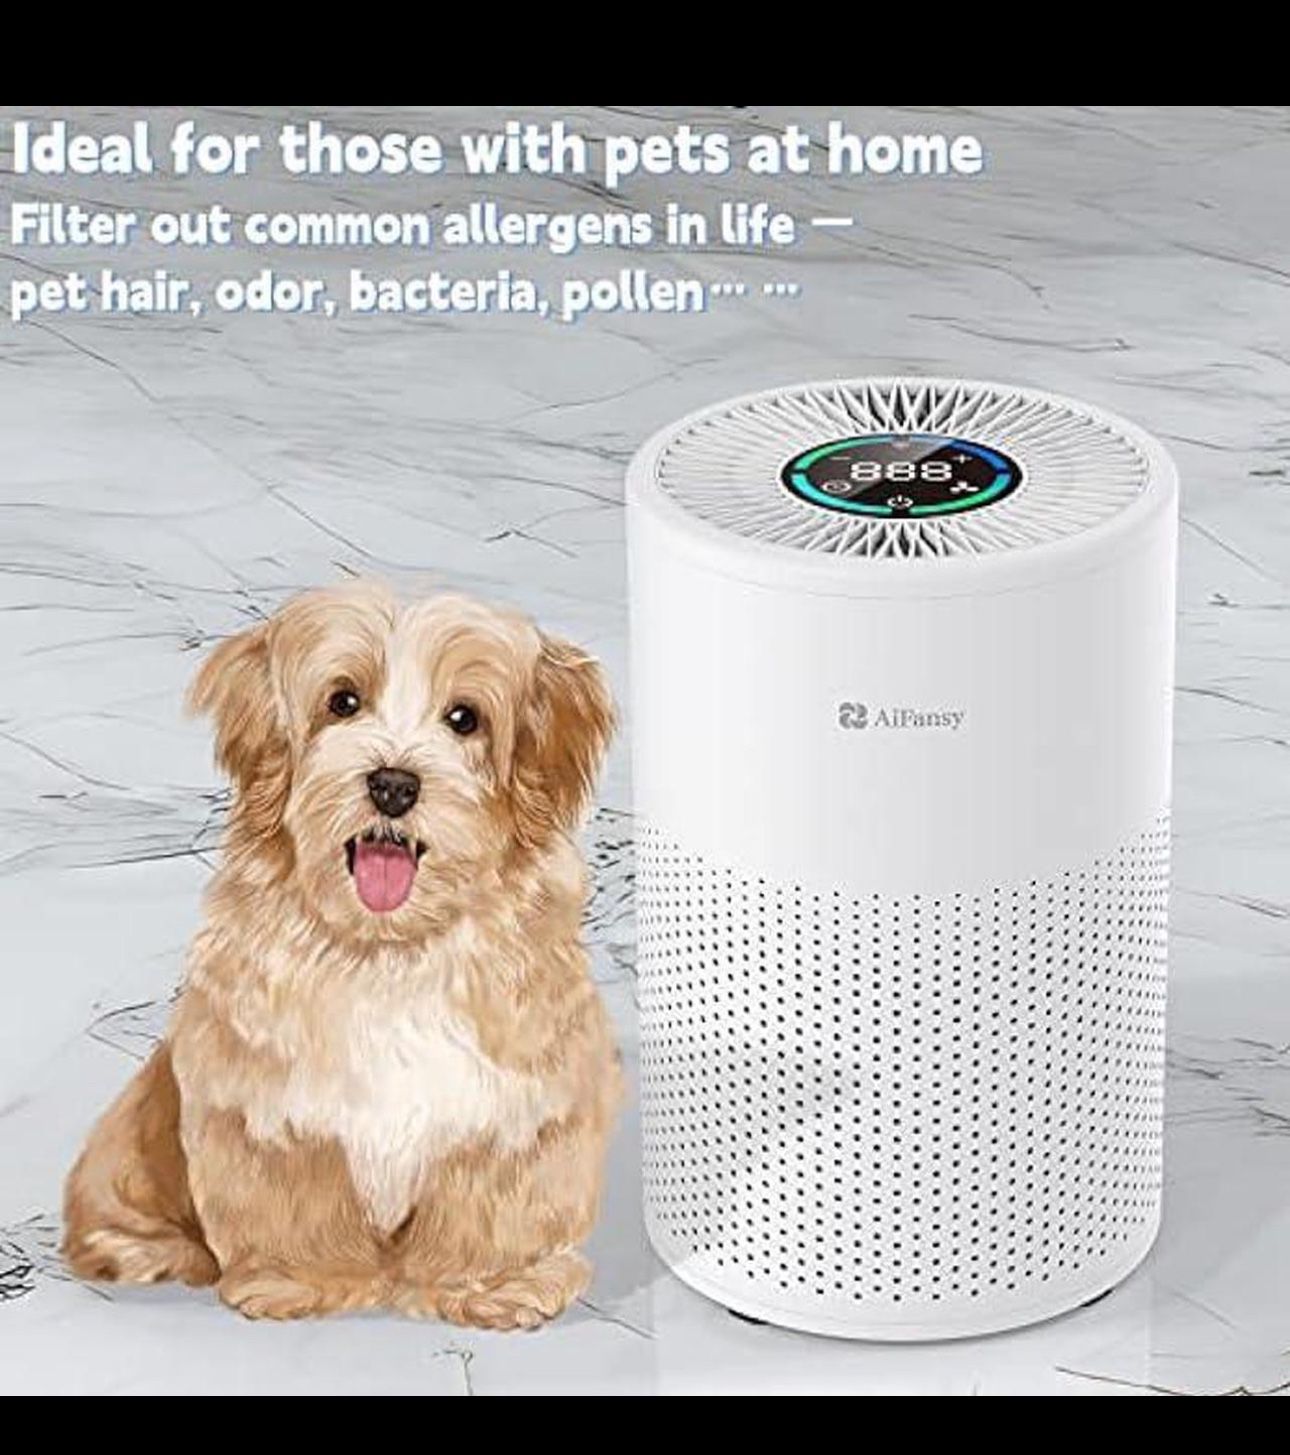 AiFansy Smart Air Purifiers for Home Office - H13 True HEPA Filter for Allergies, Quality Monitor, Filters Odors Smoke Dust Pollen Pet Dog Cat